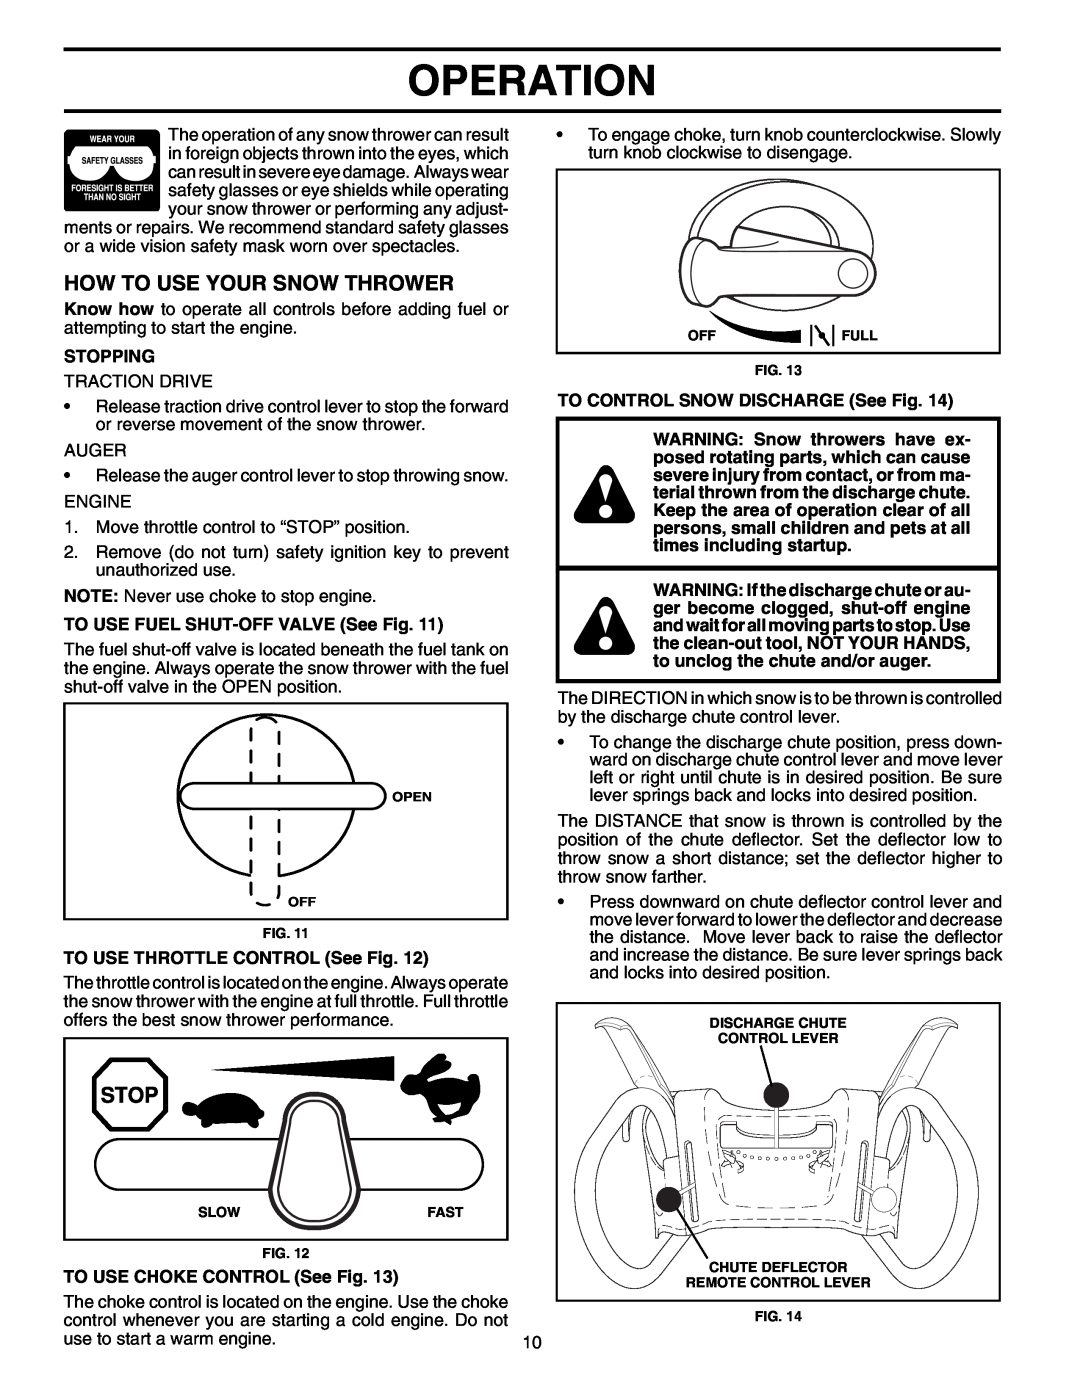 Husqvarna 9527SBEB owner manual How To Use Your Snow Thrower, Operation, Stopping, TO USE FUEL SHUT-OFF VALVE See Fig 